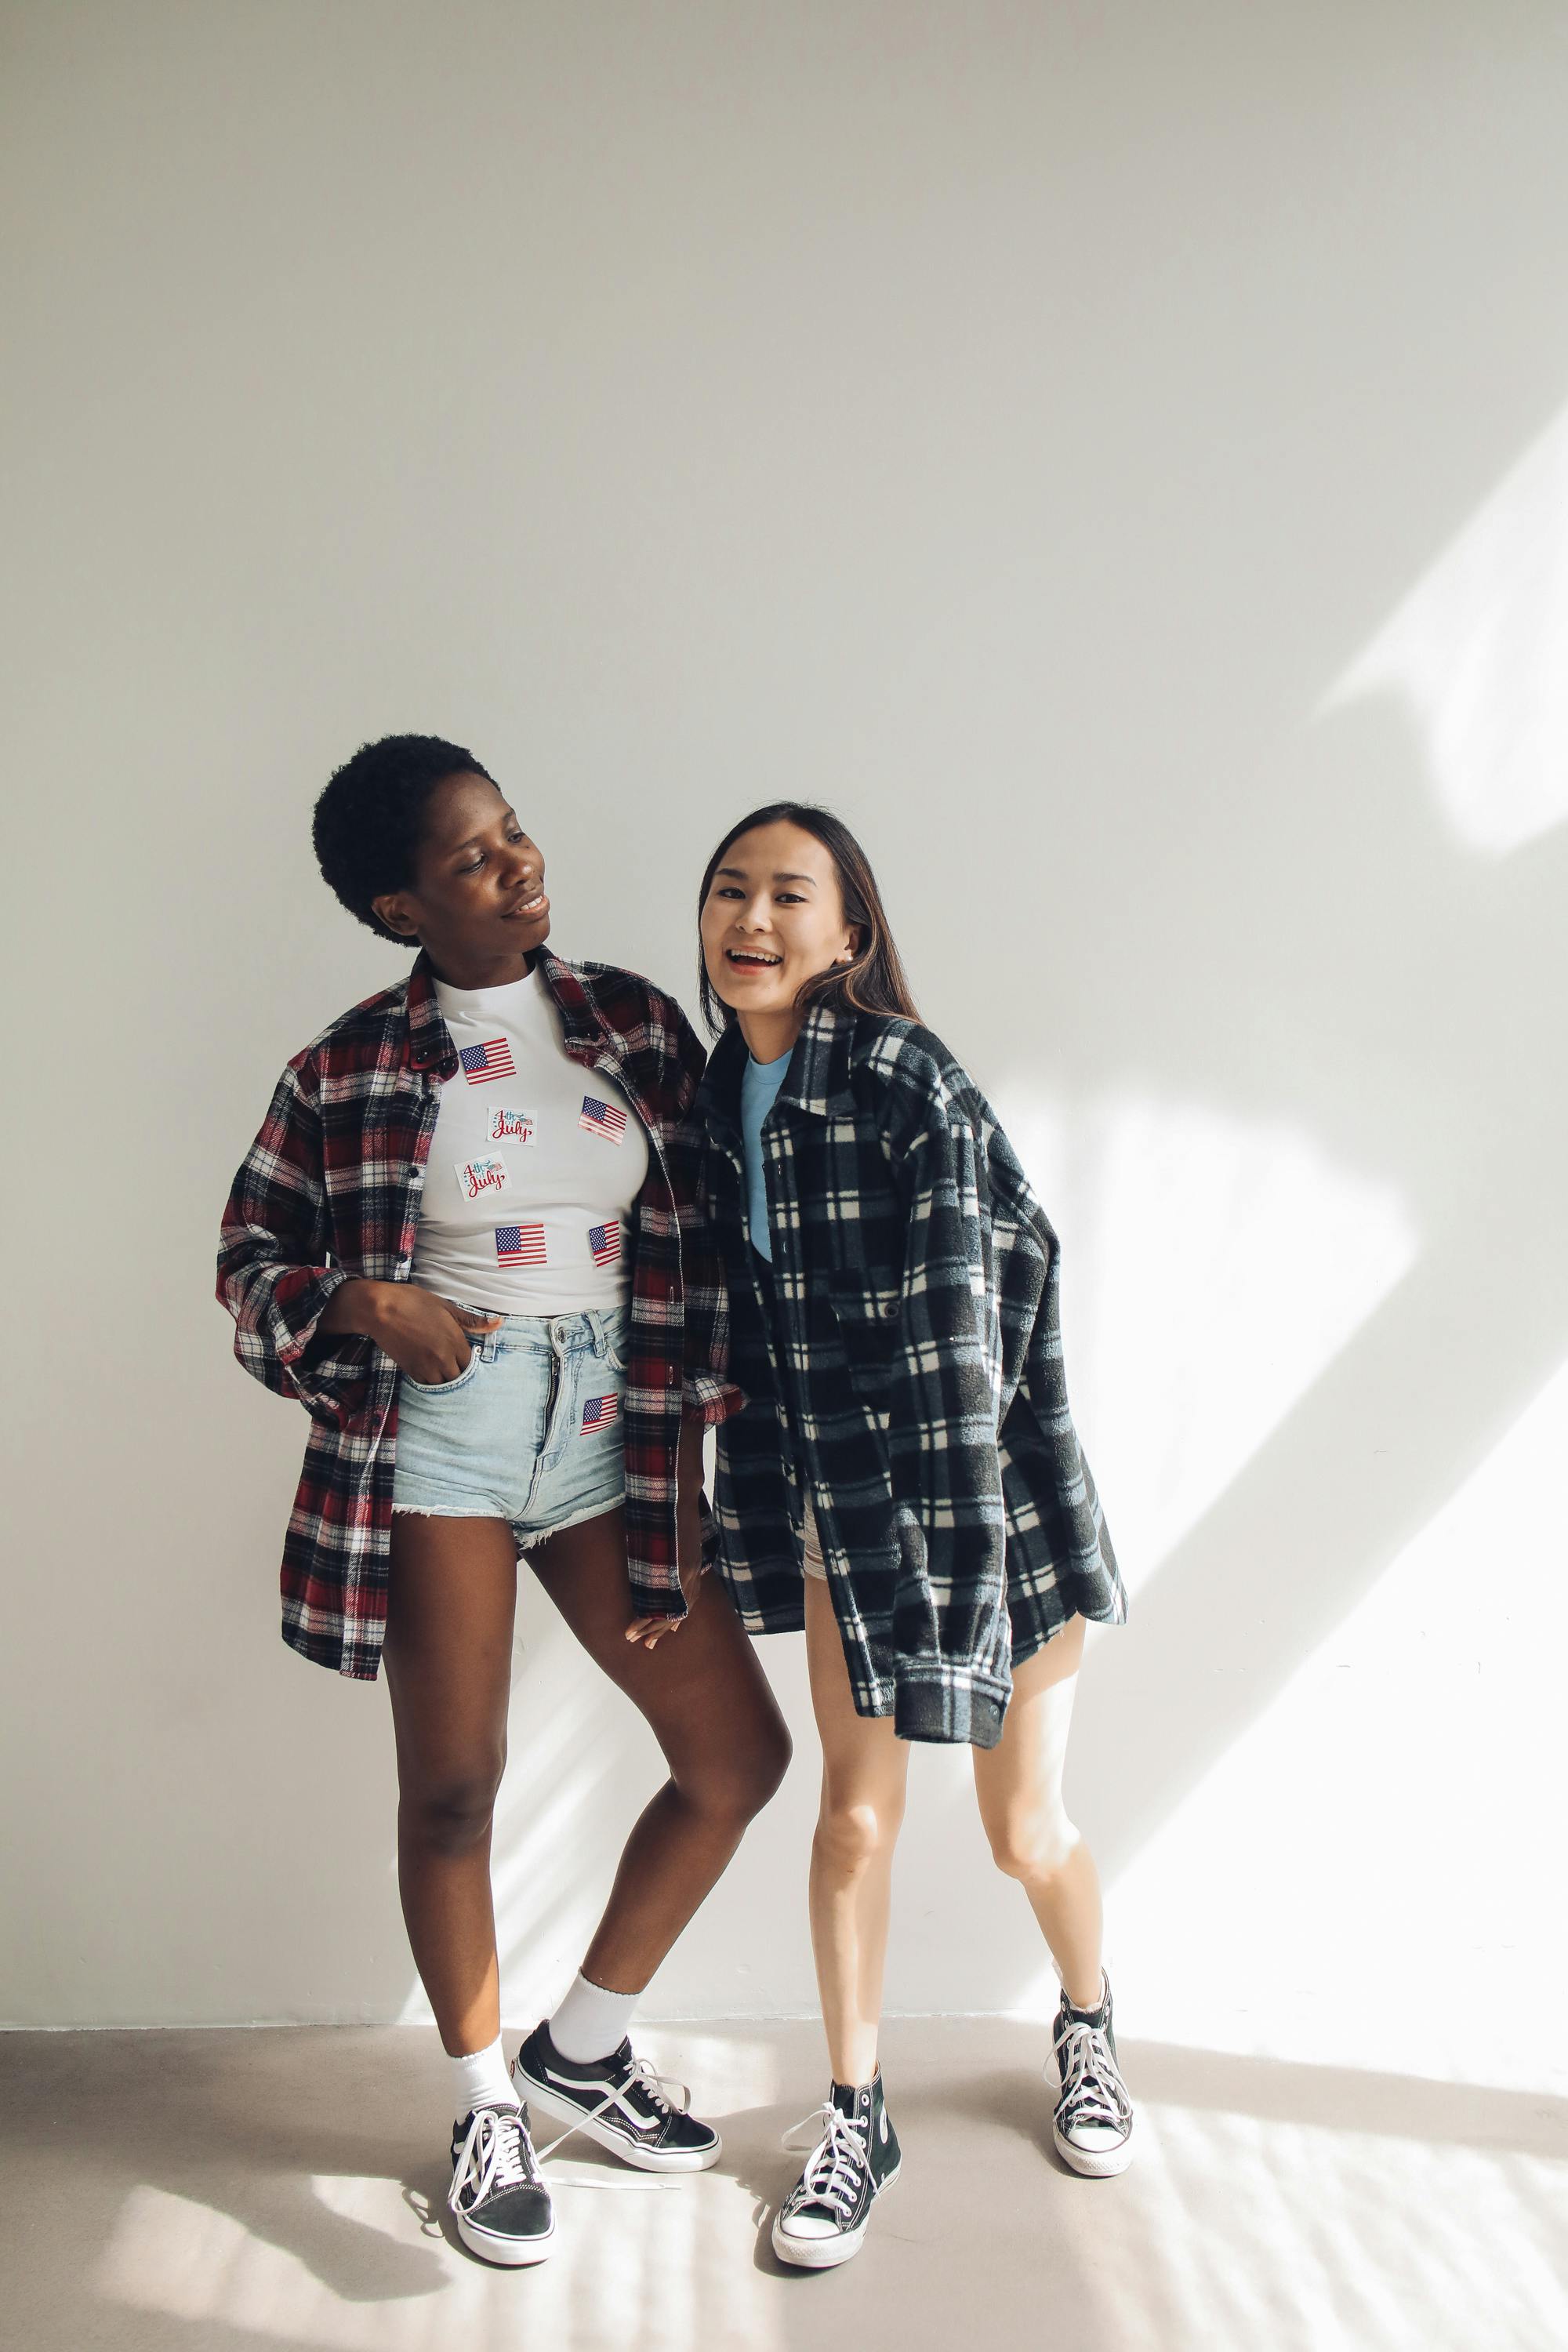 women wearing plaid button up shirts and black sneakers